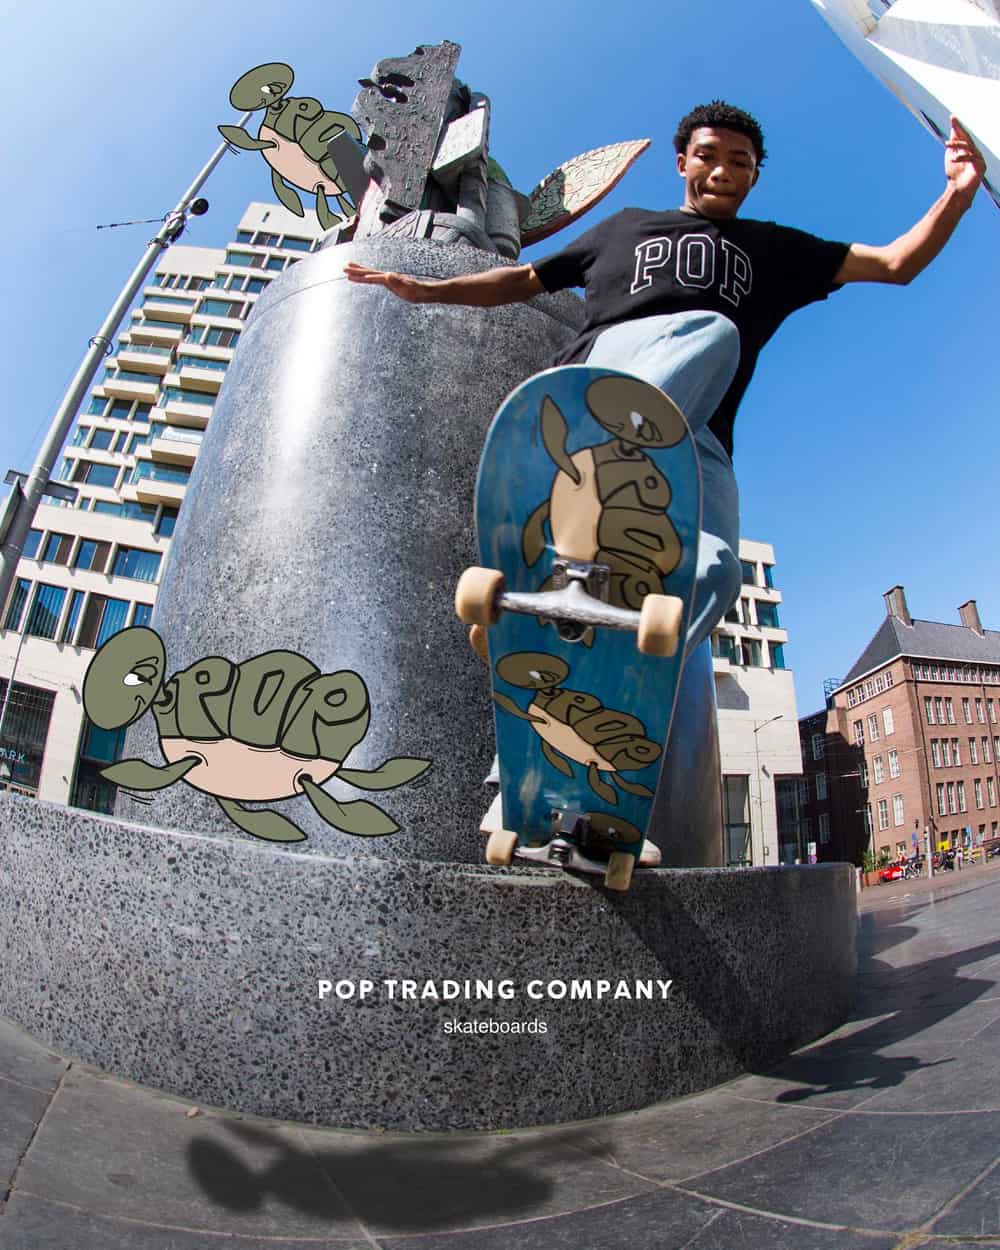 Black man on skateboard wearing a black Pop Trading Co logo T-shirt and pale wash jeans